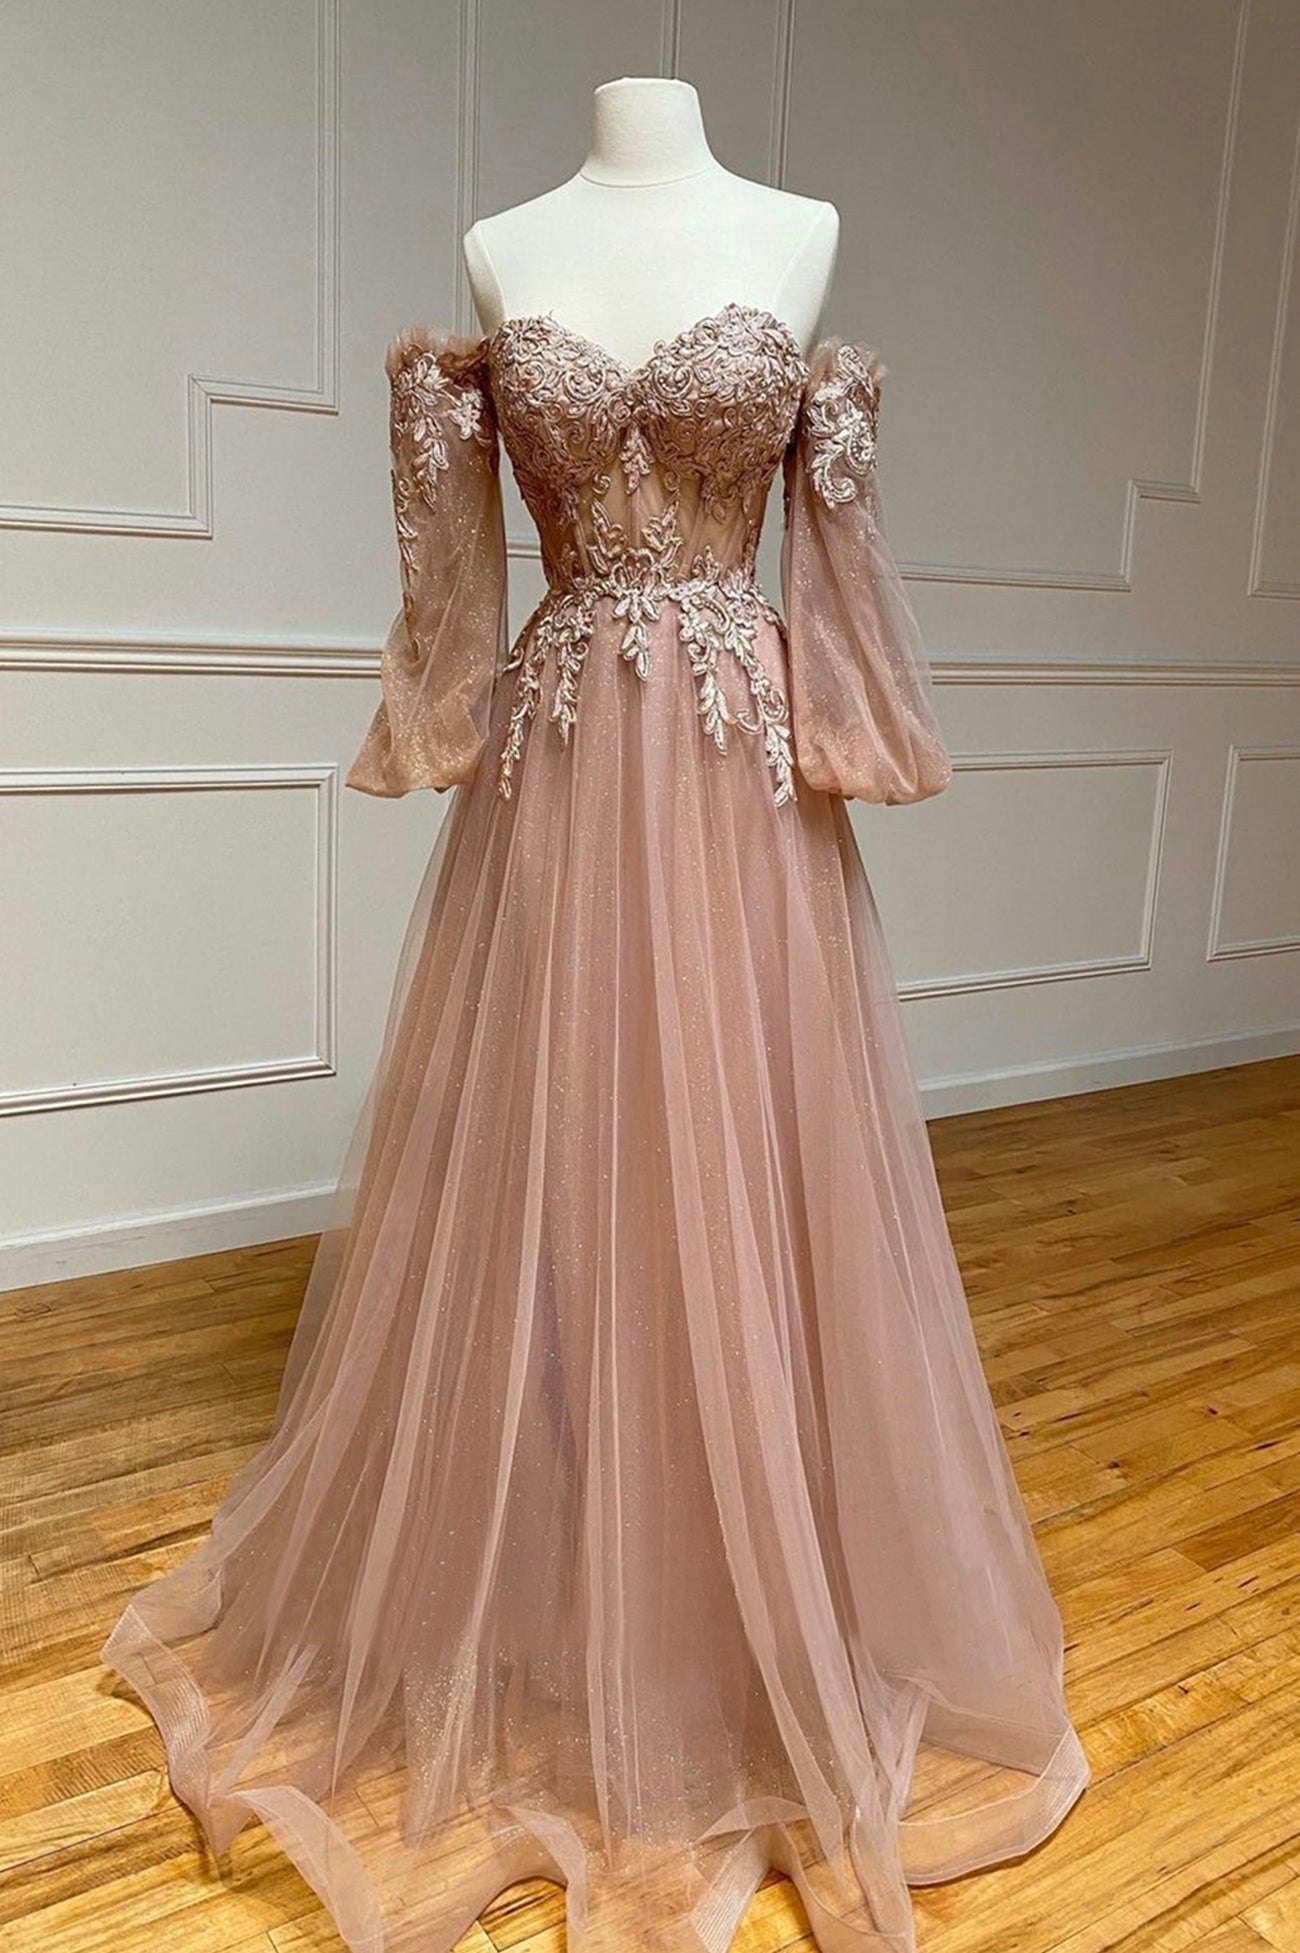 Bridesmaid Dresses Sale, A-Line Strapless Long Lace Prom Dress, Sweetheart Neck Tulle Evening Party Dress